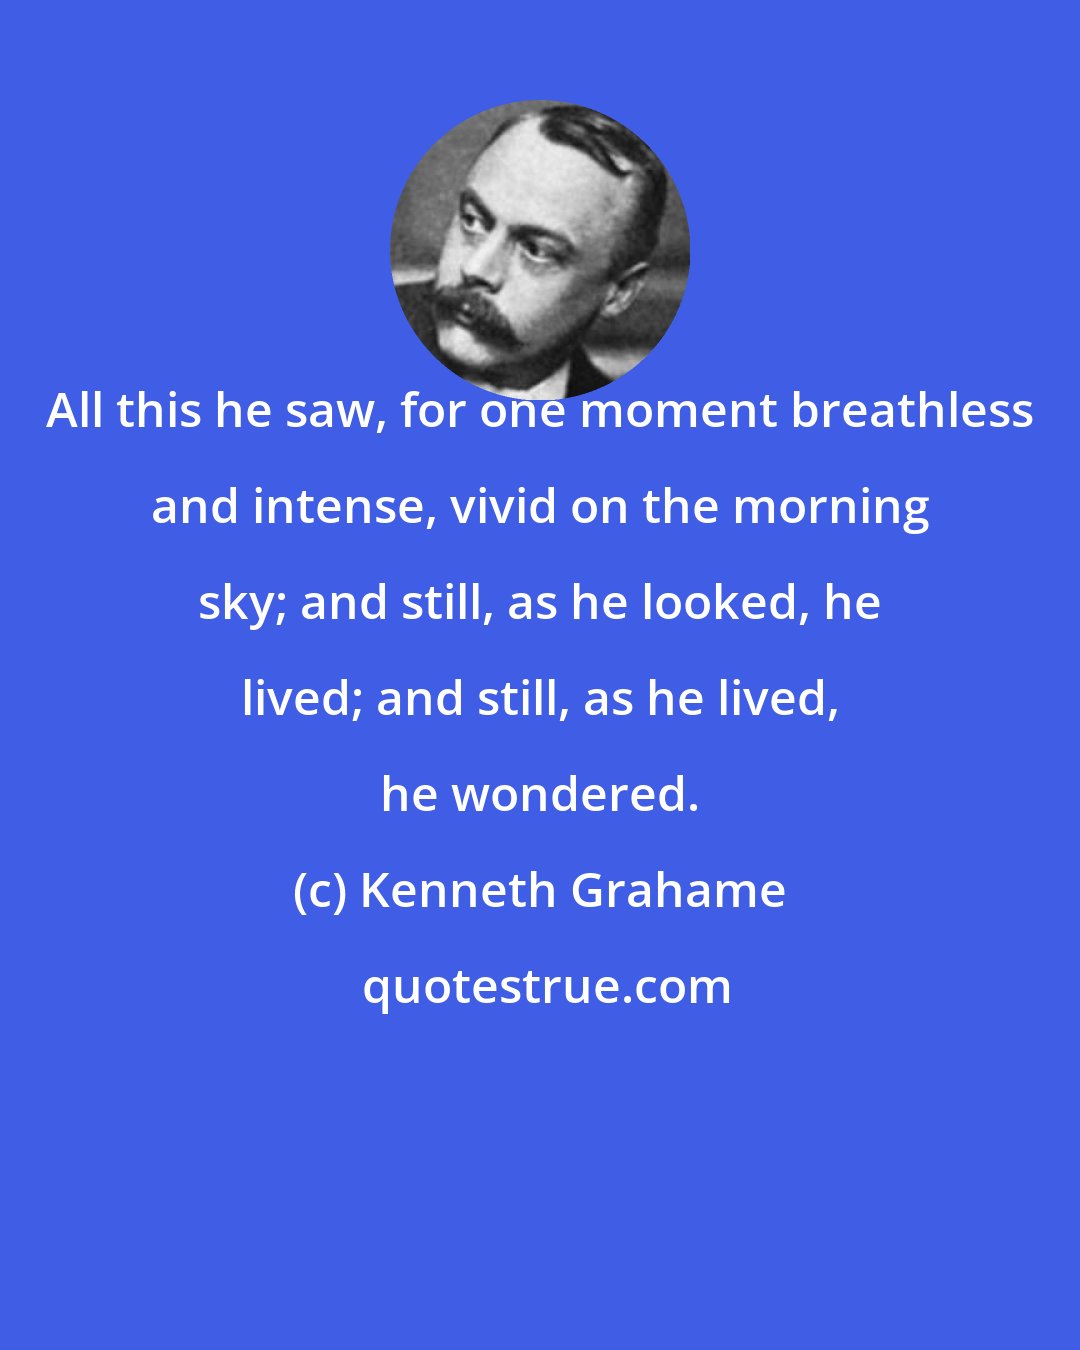 Kenneth Grahame: All this he saw, for one moment breathless and intense, vivid on the morning sky; and still, as he looked, he lived; and still, as he lived, he wondered.